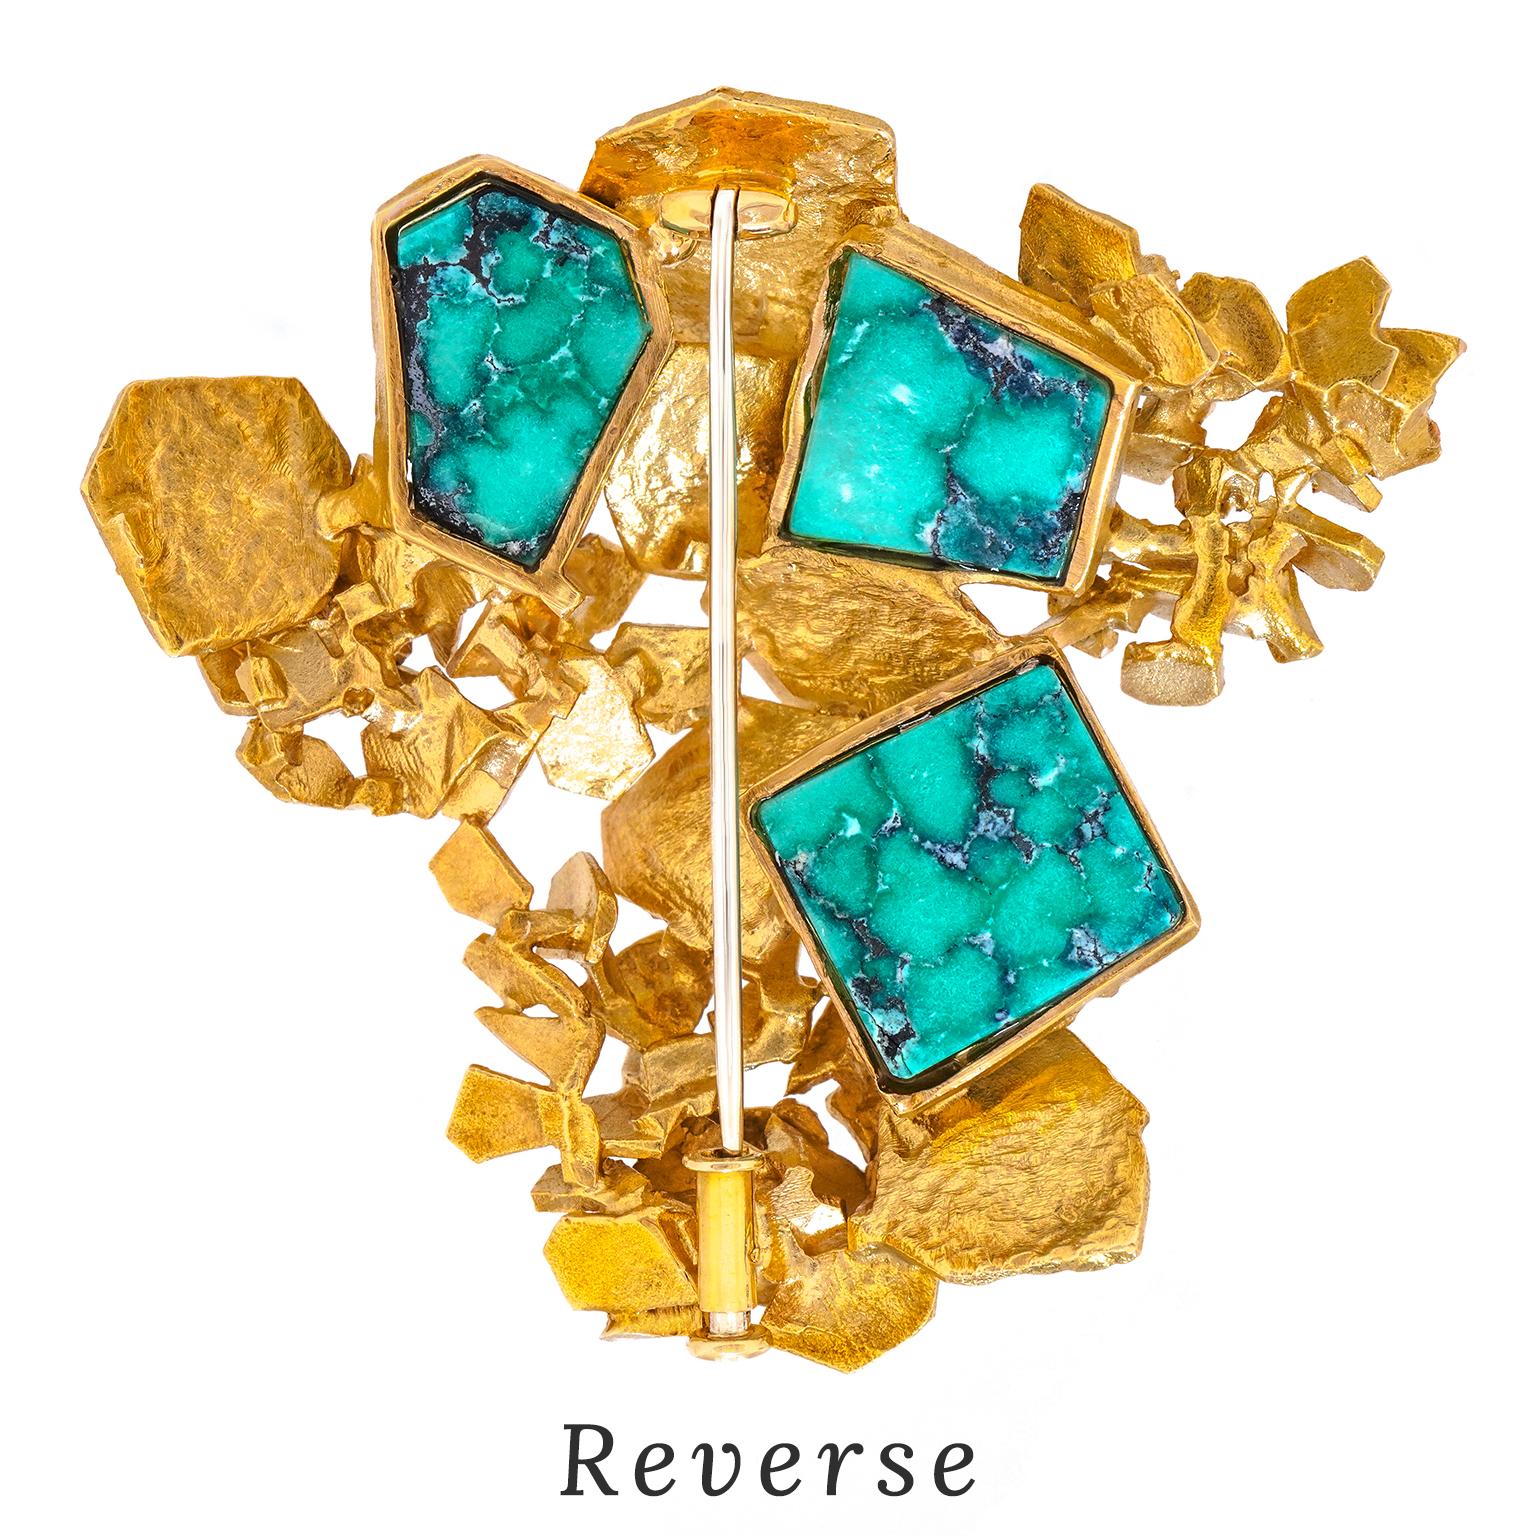 Swiss Modern Sixties Turquoise and Gold Brooch For Sale 1